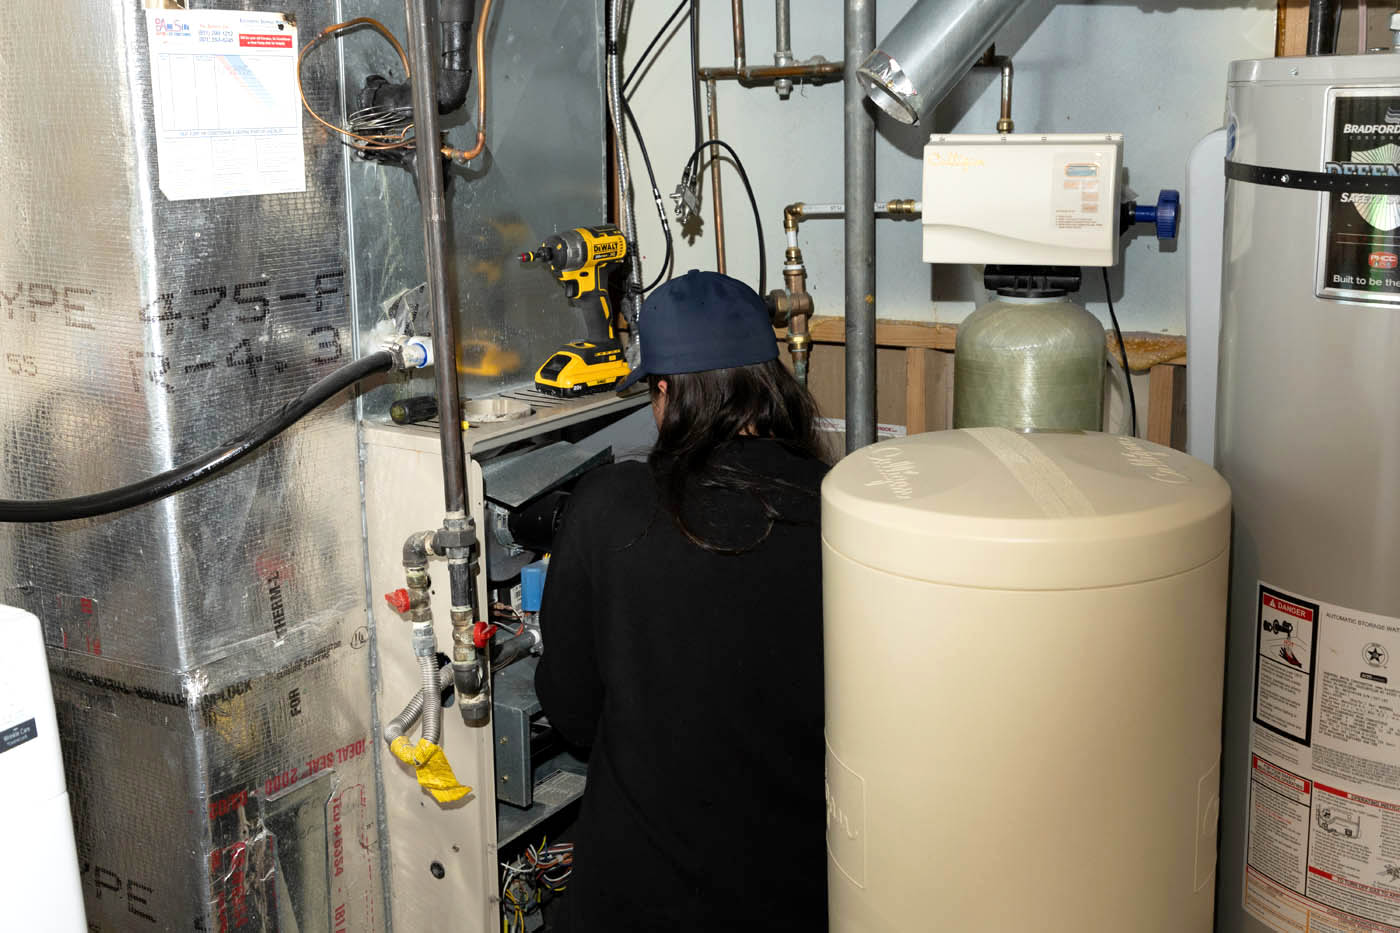 An expert from Absolute Comfort working on a home's water heater system - do you need your system serviced? Contact us today for a water heater cost estimate!